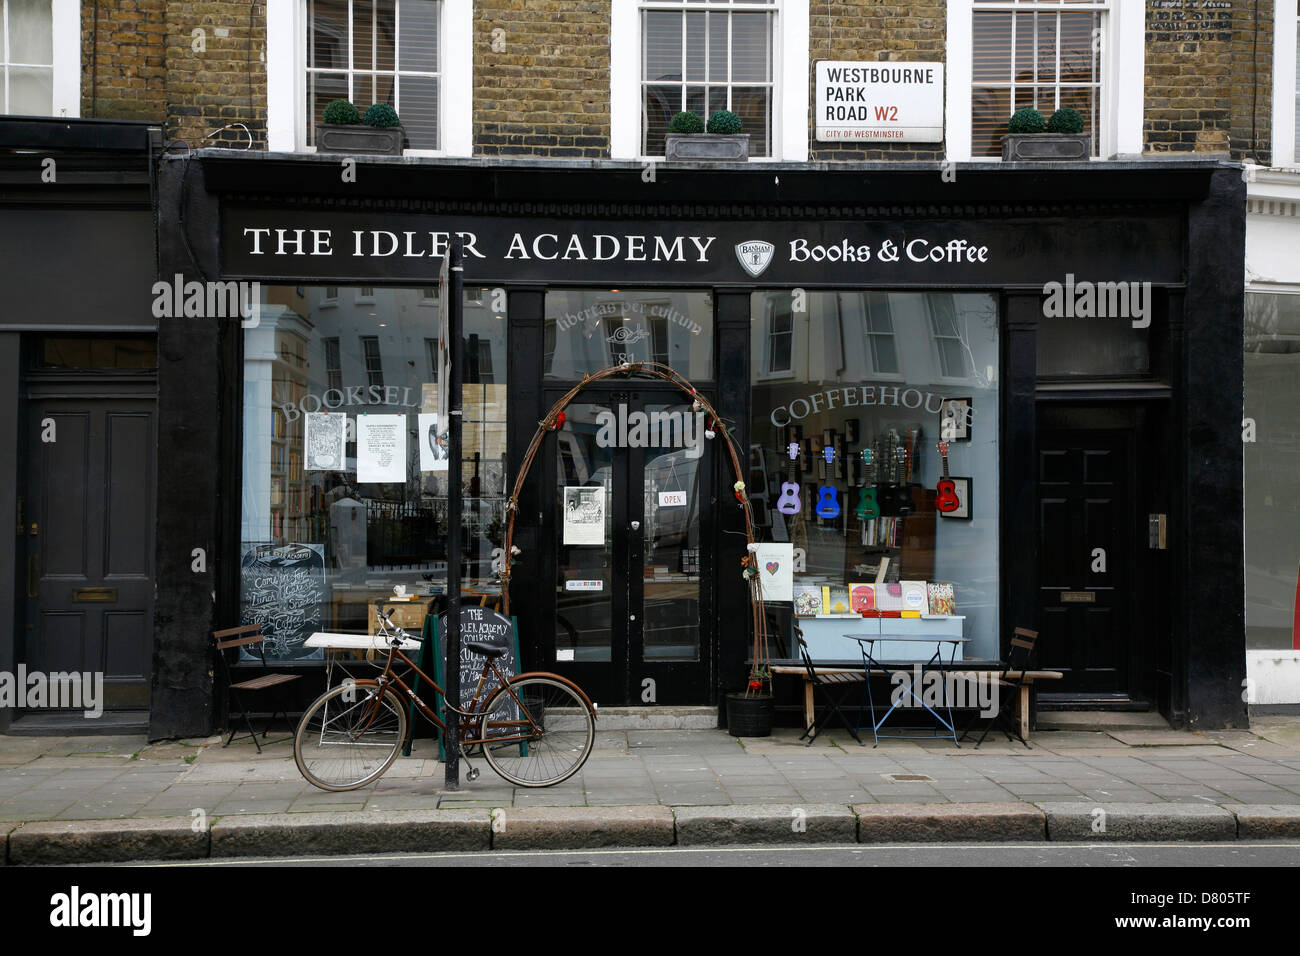 Idler Academy bookshop and cafe on Westbourne Park Road, Notting Hill, London, UK Stock Photo